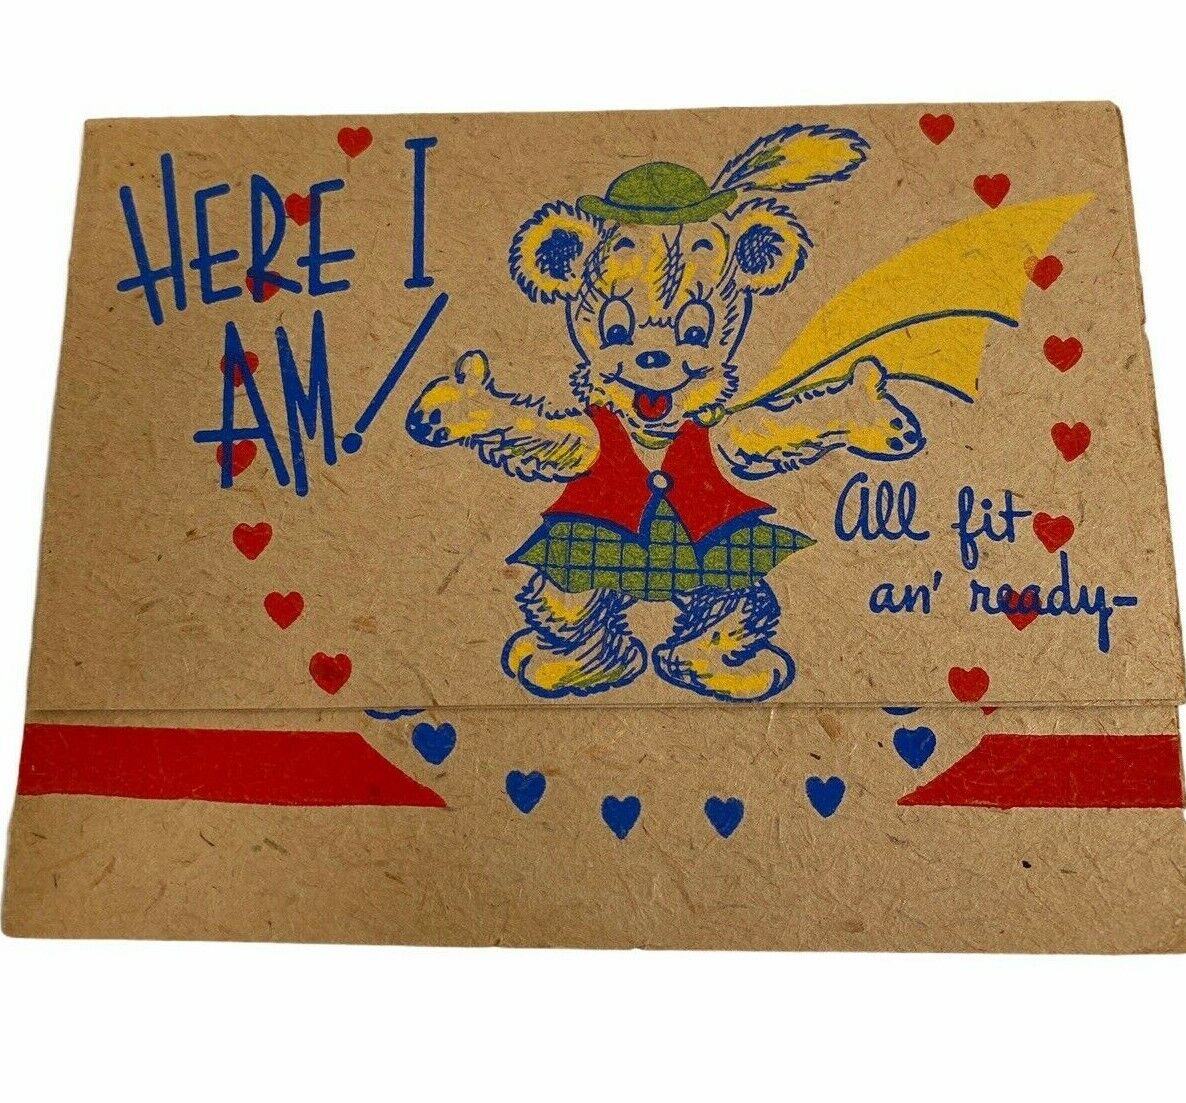 Vintage Die Cut Valentine Greeting Card Heart Bear Here I am All Fit An\' Ready